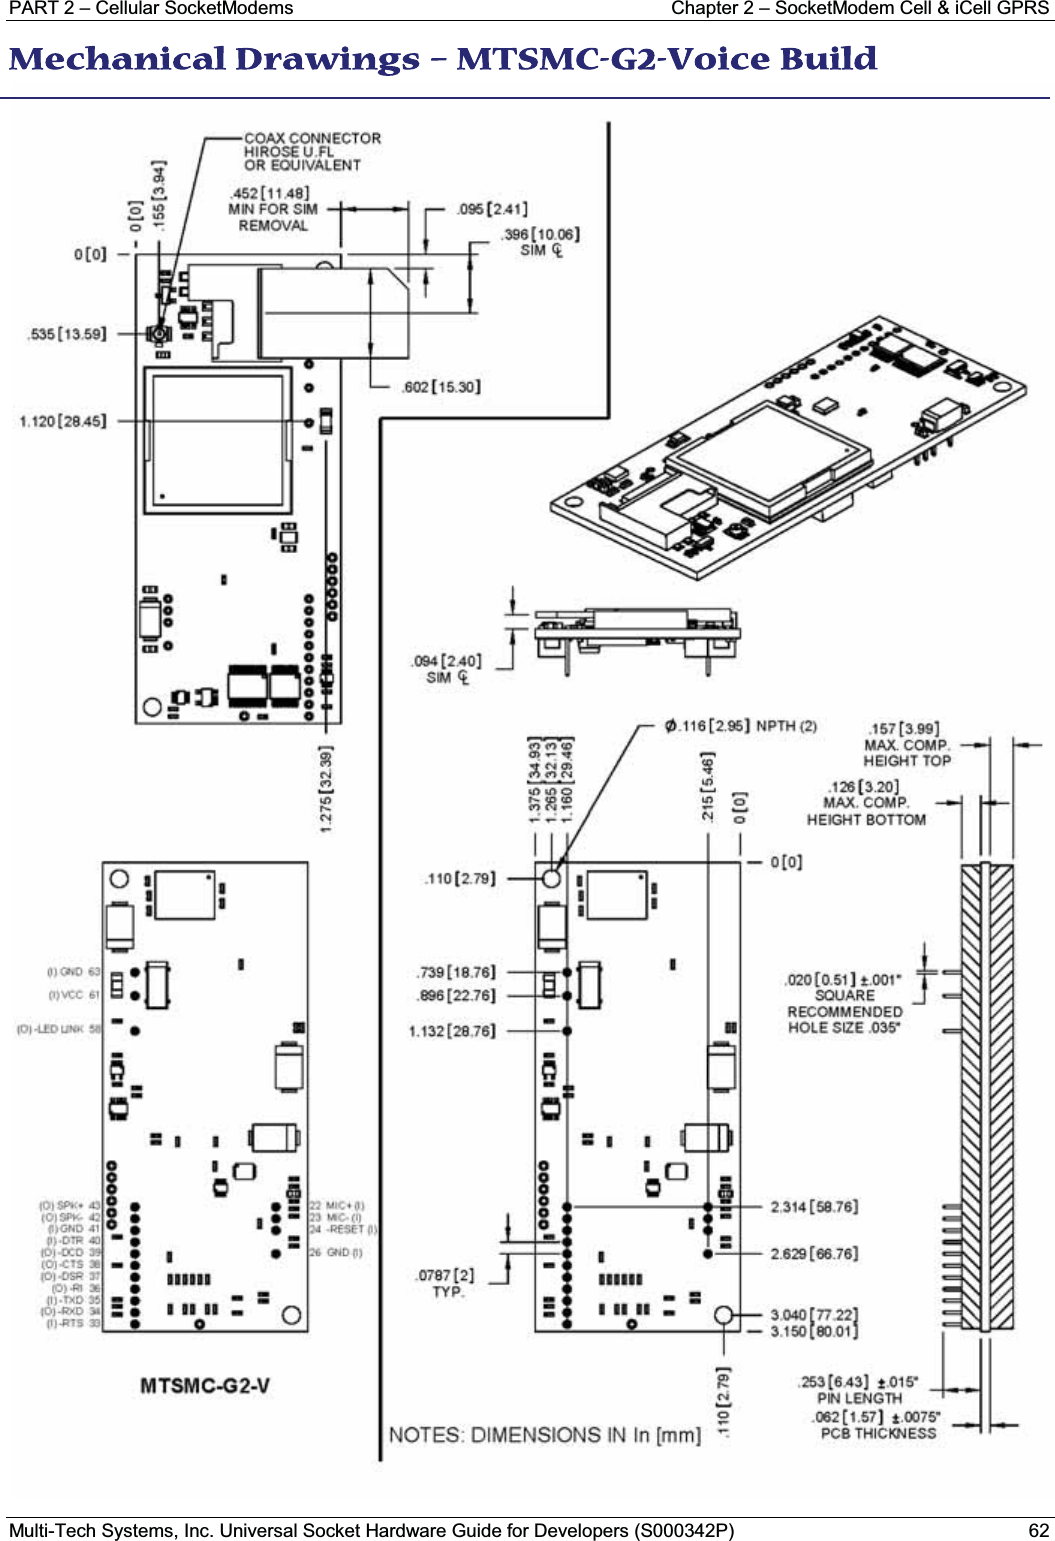 PART 2 – Cellular SocketModems  Chapter 2 – SocketModem Cell &amp; iCell GPRSMulti-Tech Systems, Inc. Universal Socket Hardware Guide for Developers (S000342P) 62MMechanical Drawings – MTSMC-G2-Voice Build 